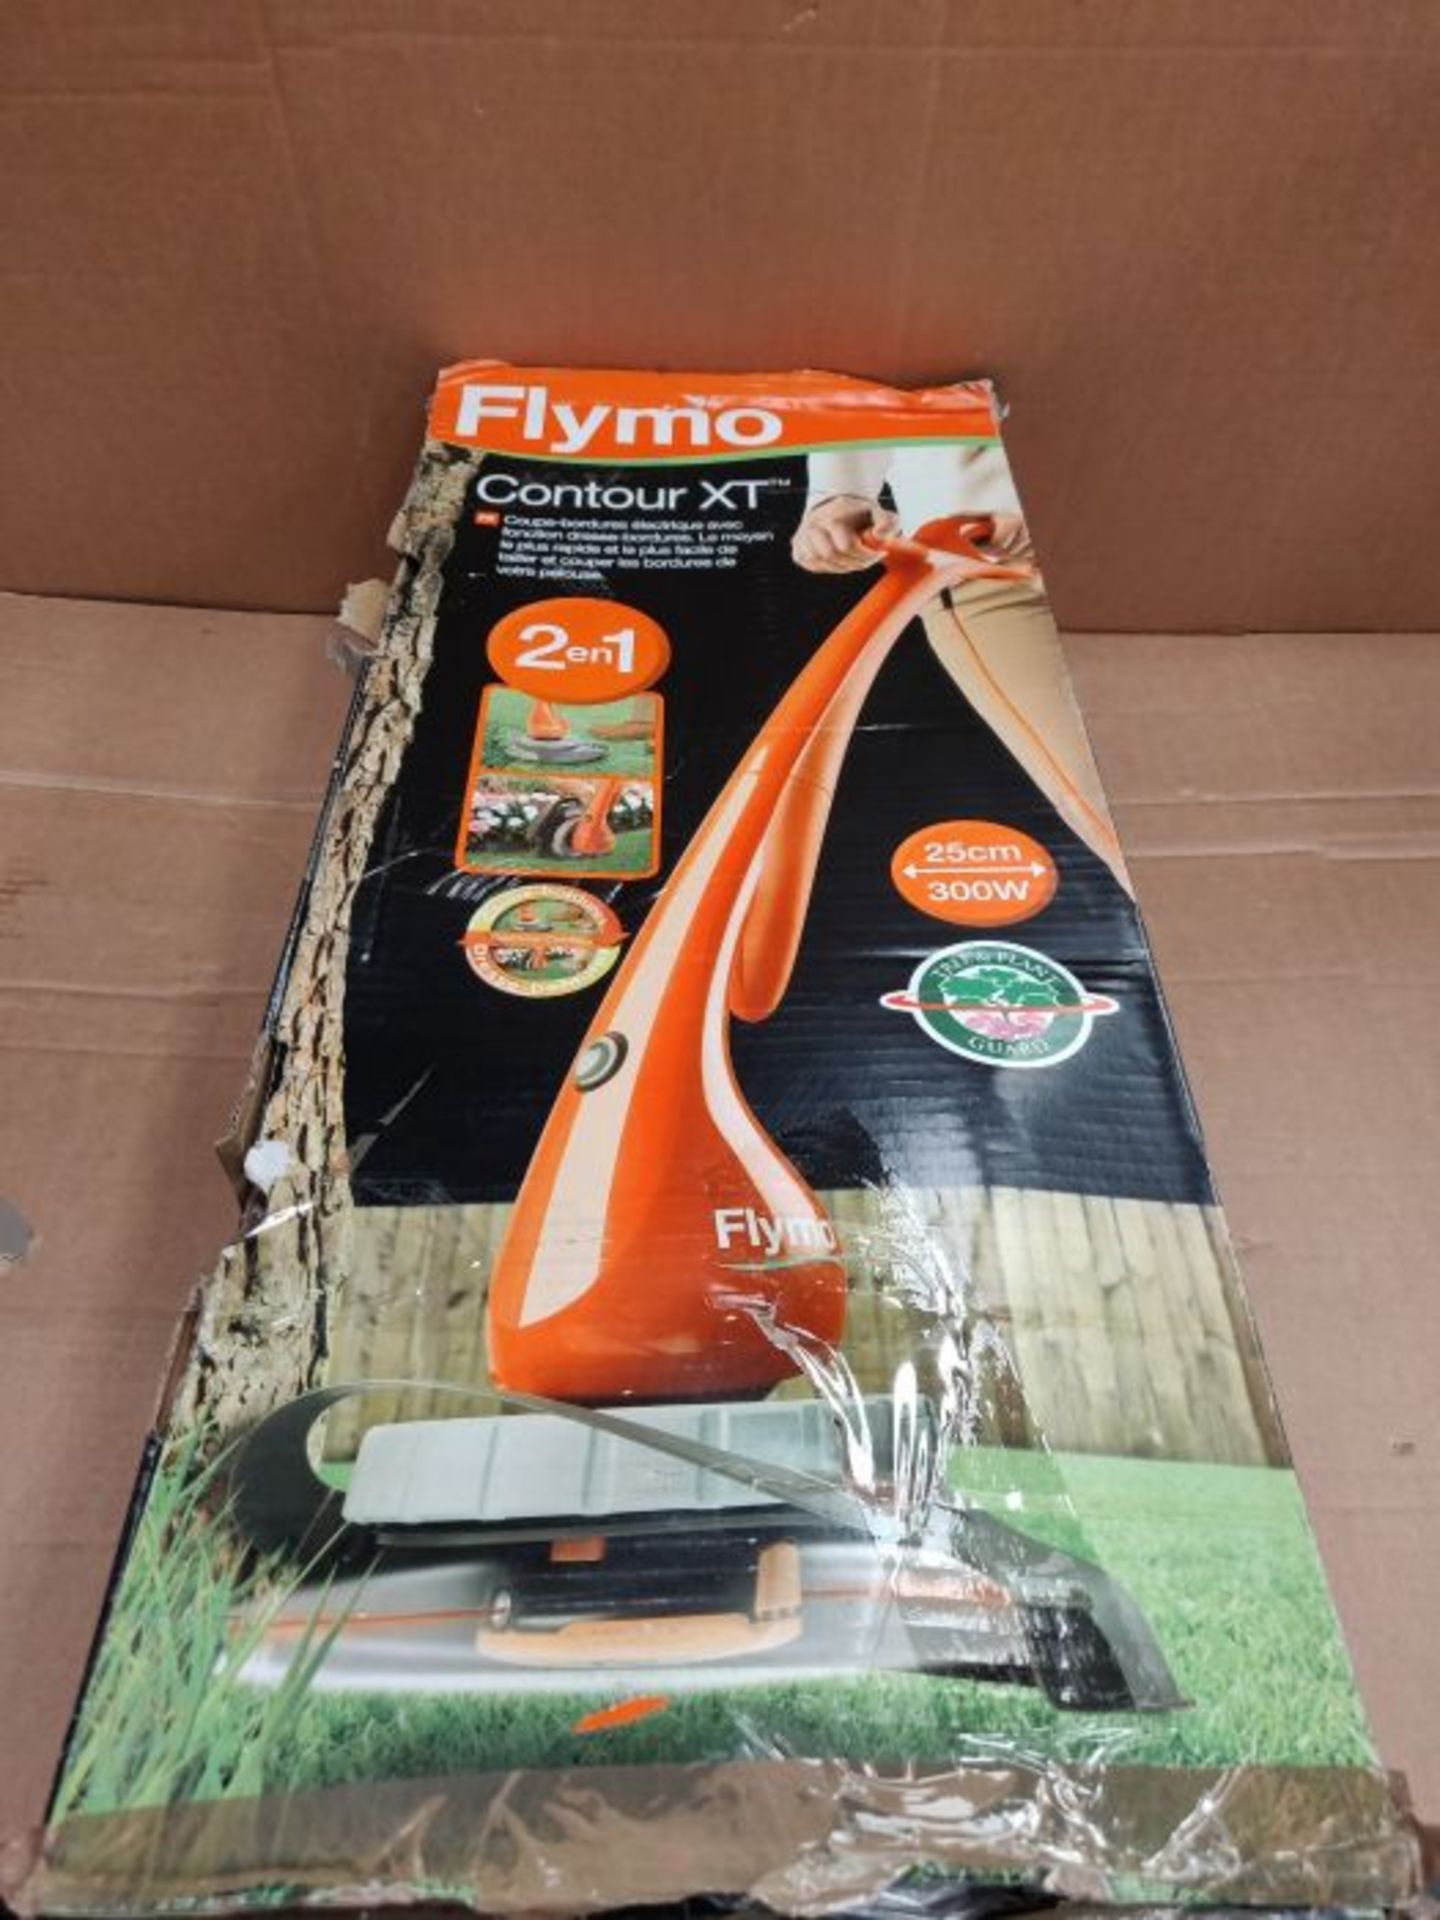 Flymo 9669523-01 Contour XT Electric Grass Trimmer and Edger, 300 W, Cutting Width 25 - Image 2 of 3